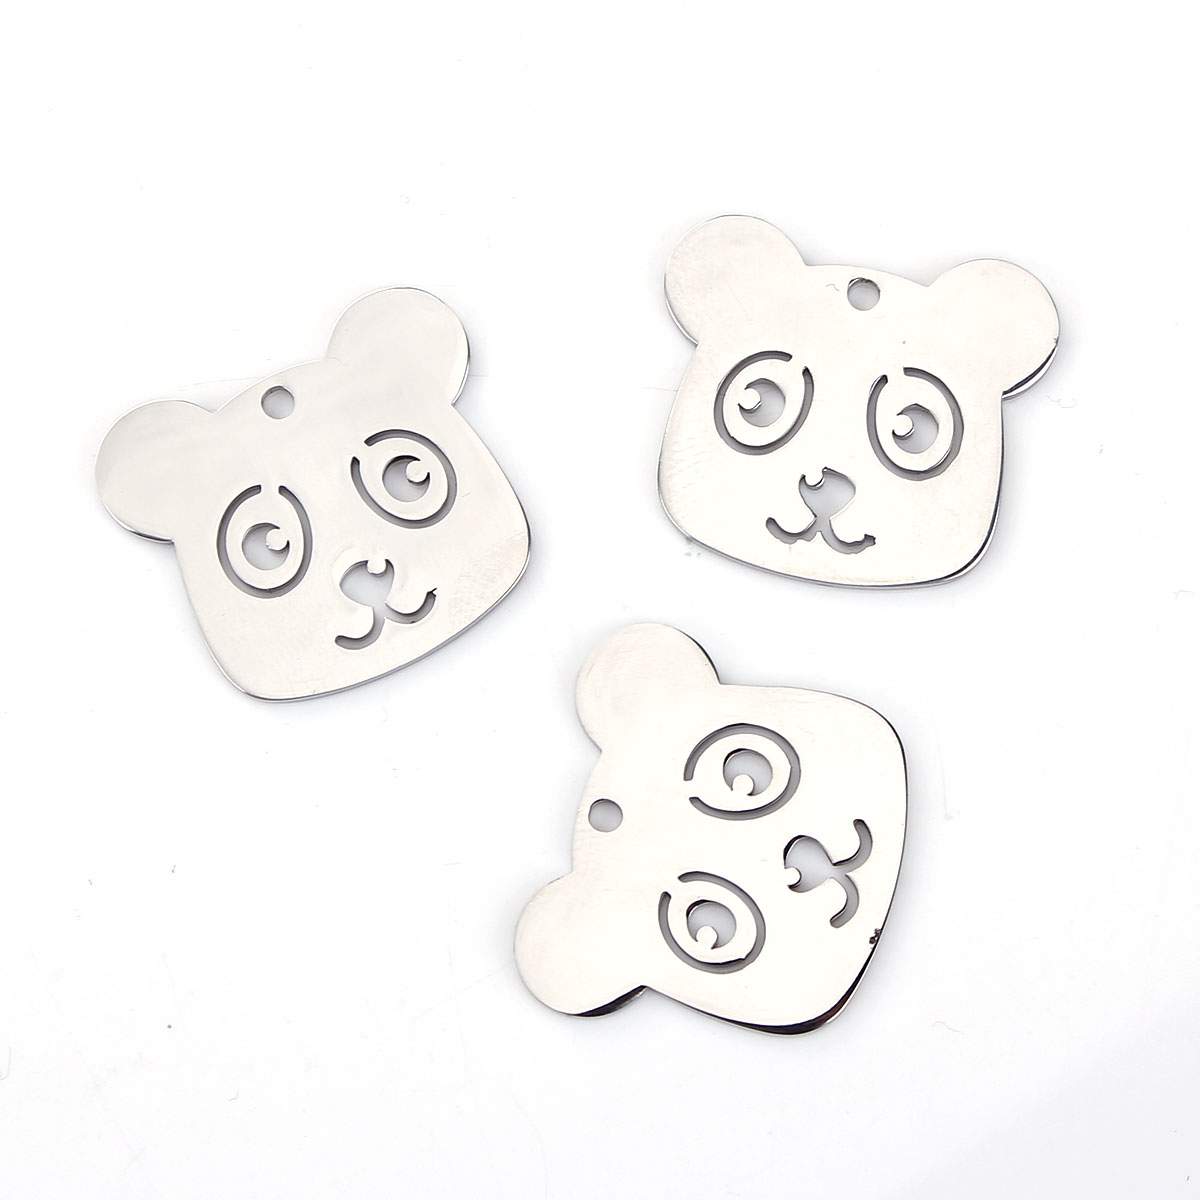 Picture of 304 Stainless Steel Pet Silhouette Charms Panda Animal Silver Tone Hollow 27mm(1 1/8") x 24mm(1"), 1 Piece